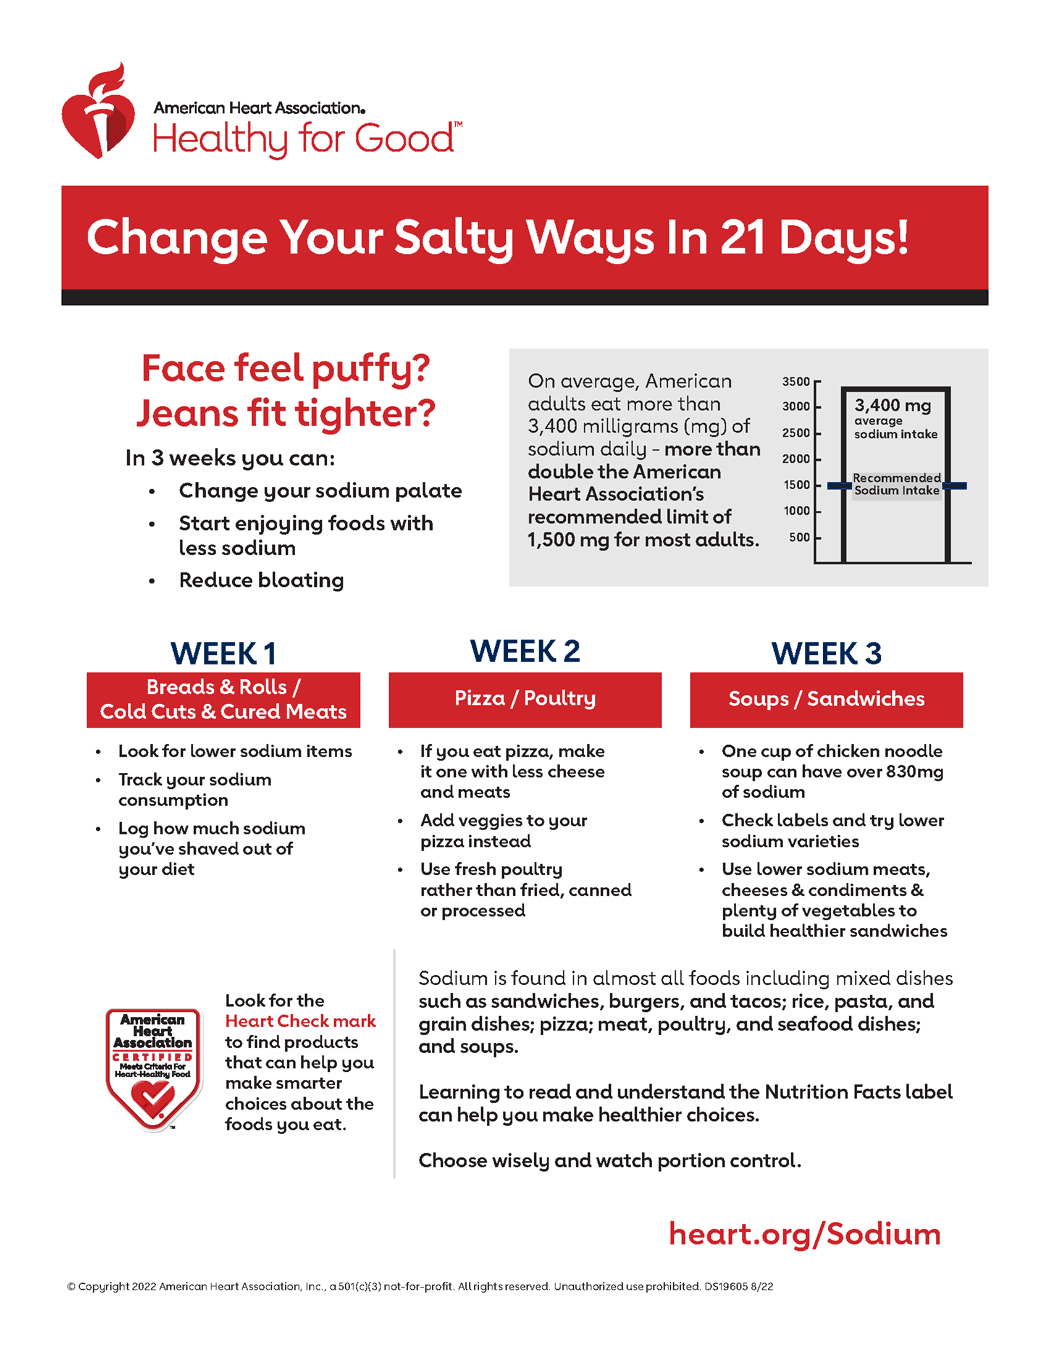 Sodium Swap Change Your Salty Ways In 21 Days Infographic American